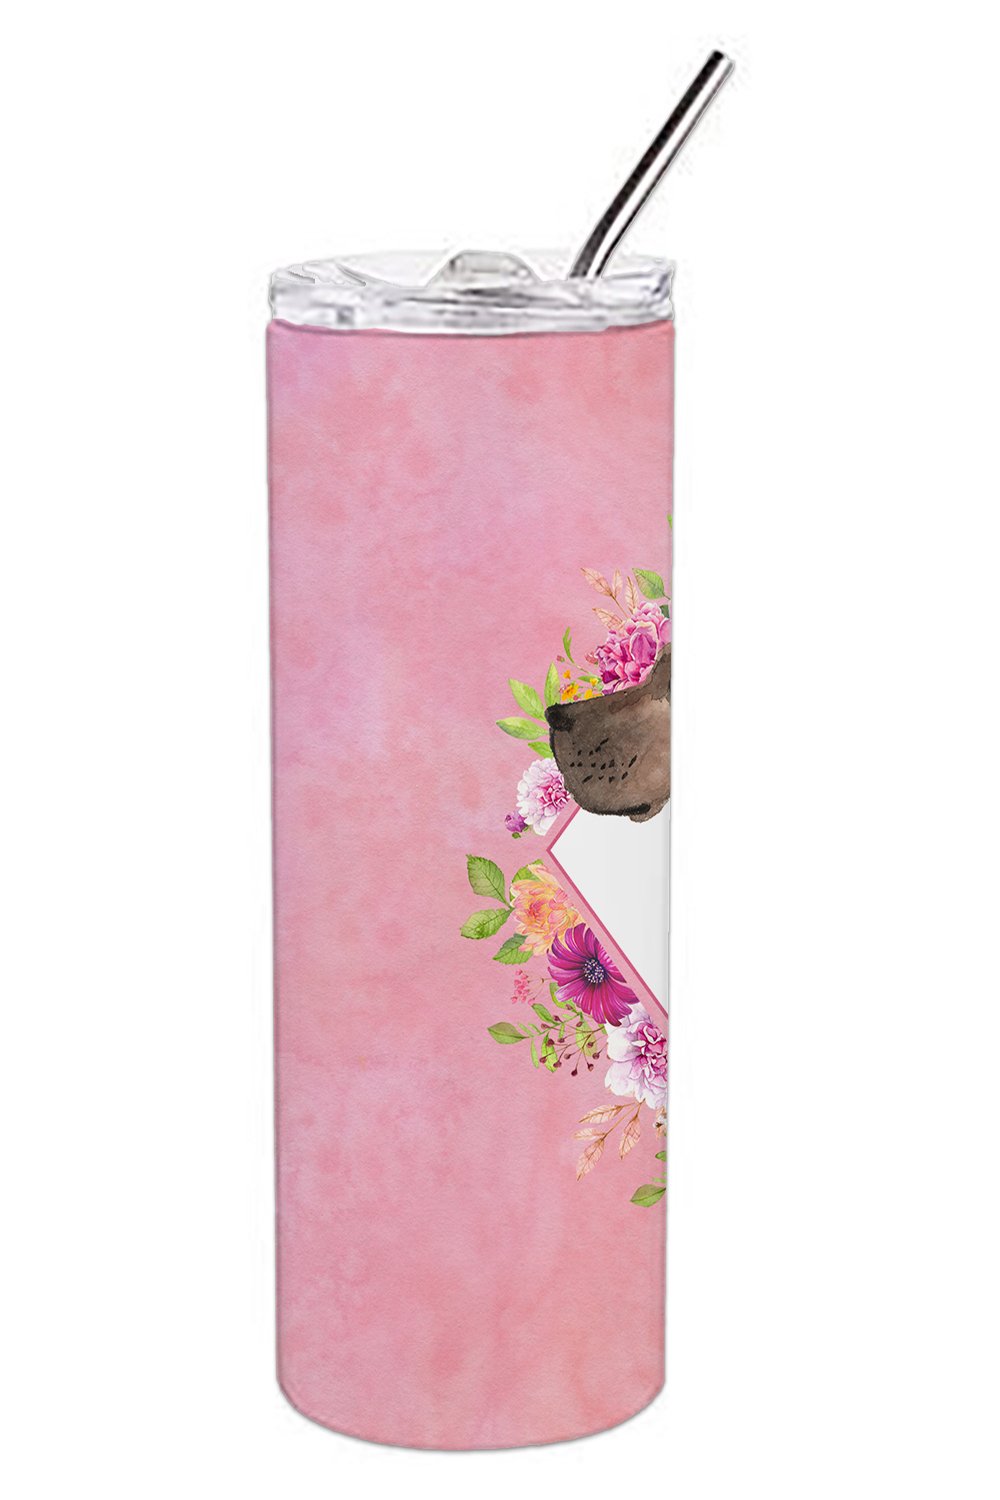 Fawn Great Dane Pink Flowers Double Walled Stainless Steel 20 oz Skinny Tumbler CK4234TBL20 by Caroline's Treasures